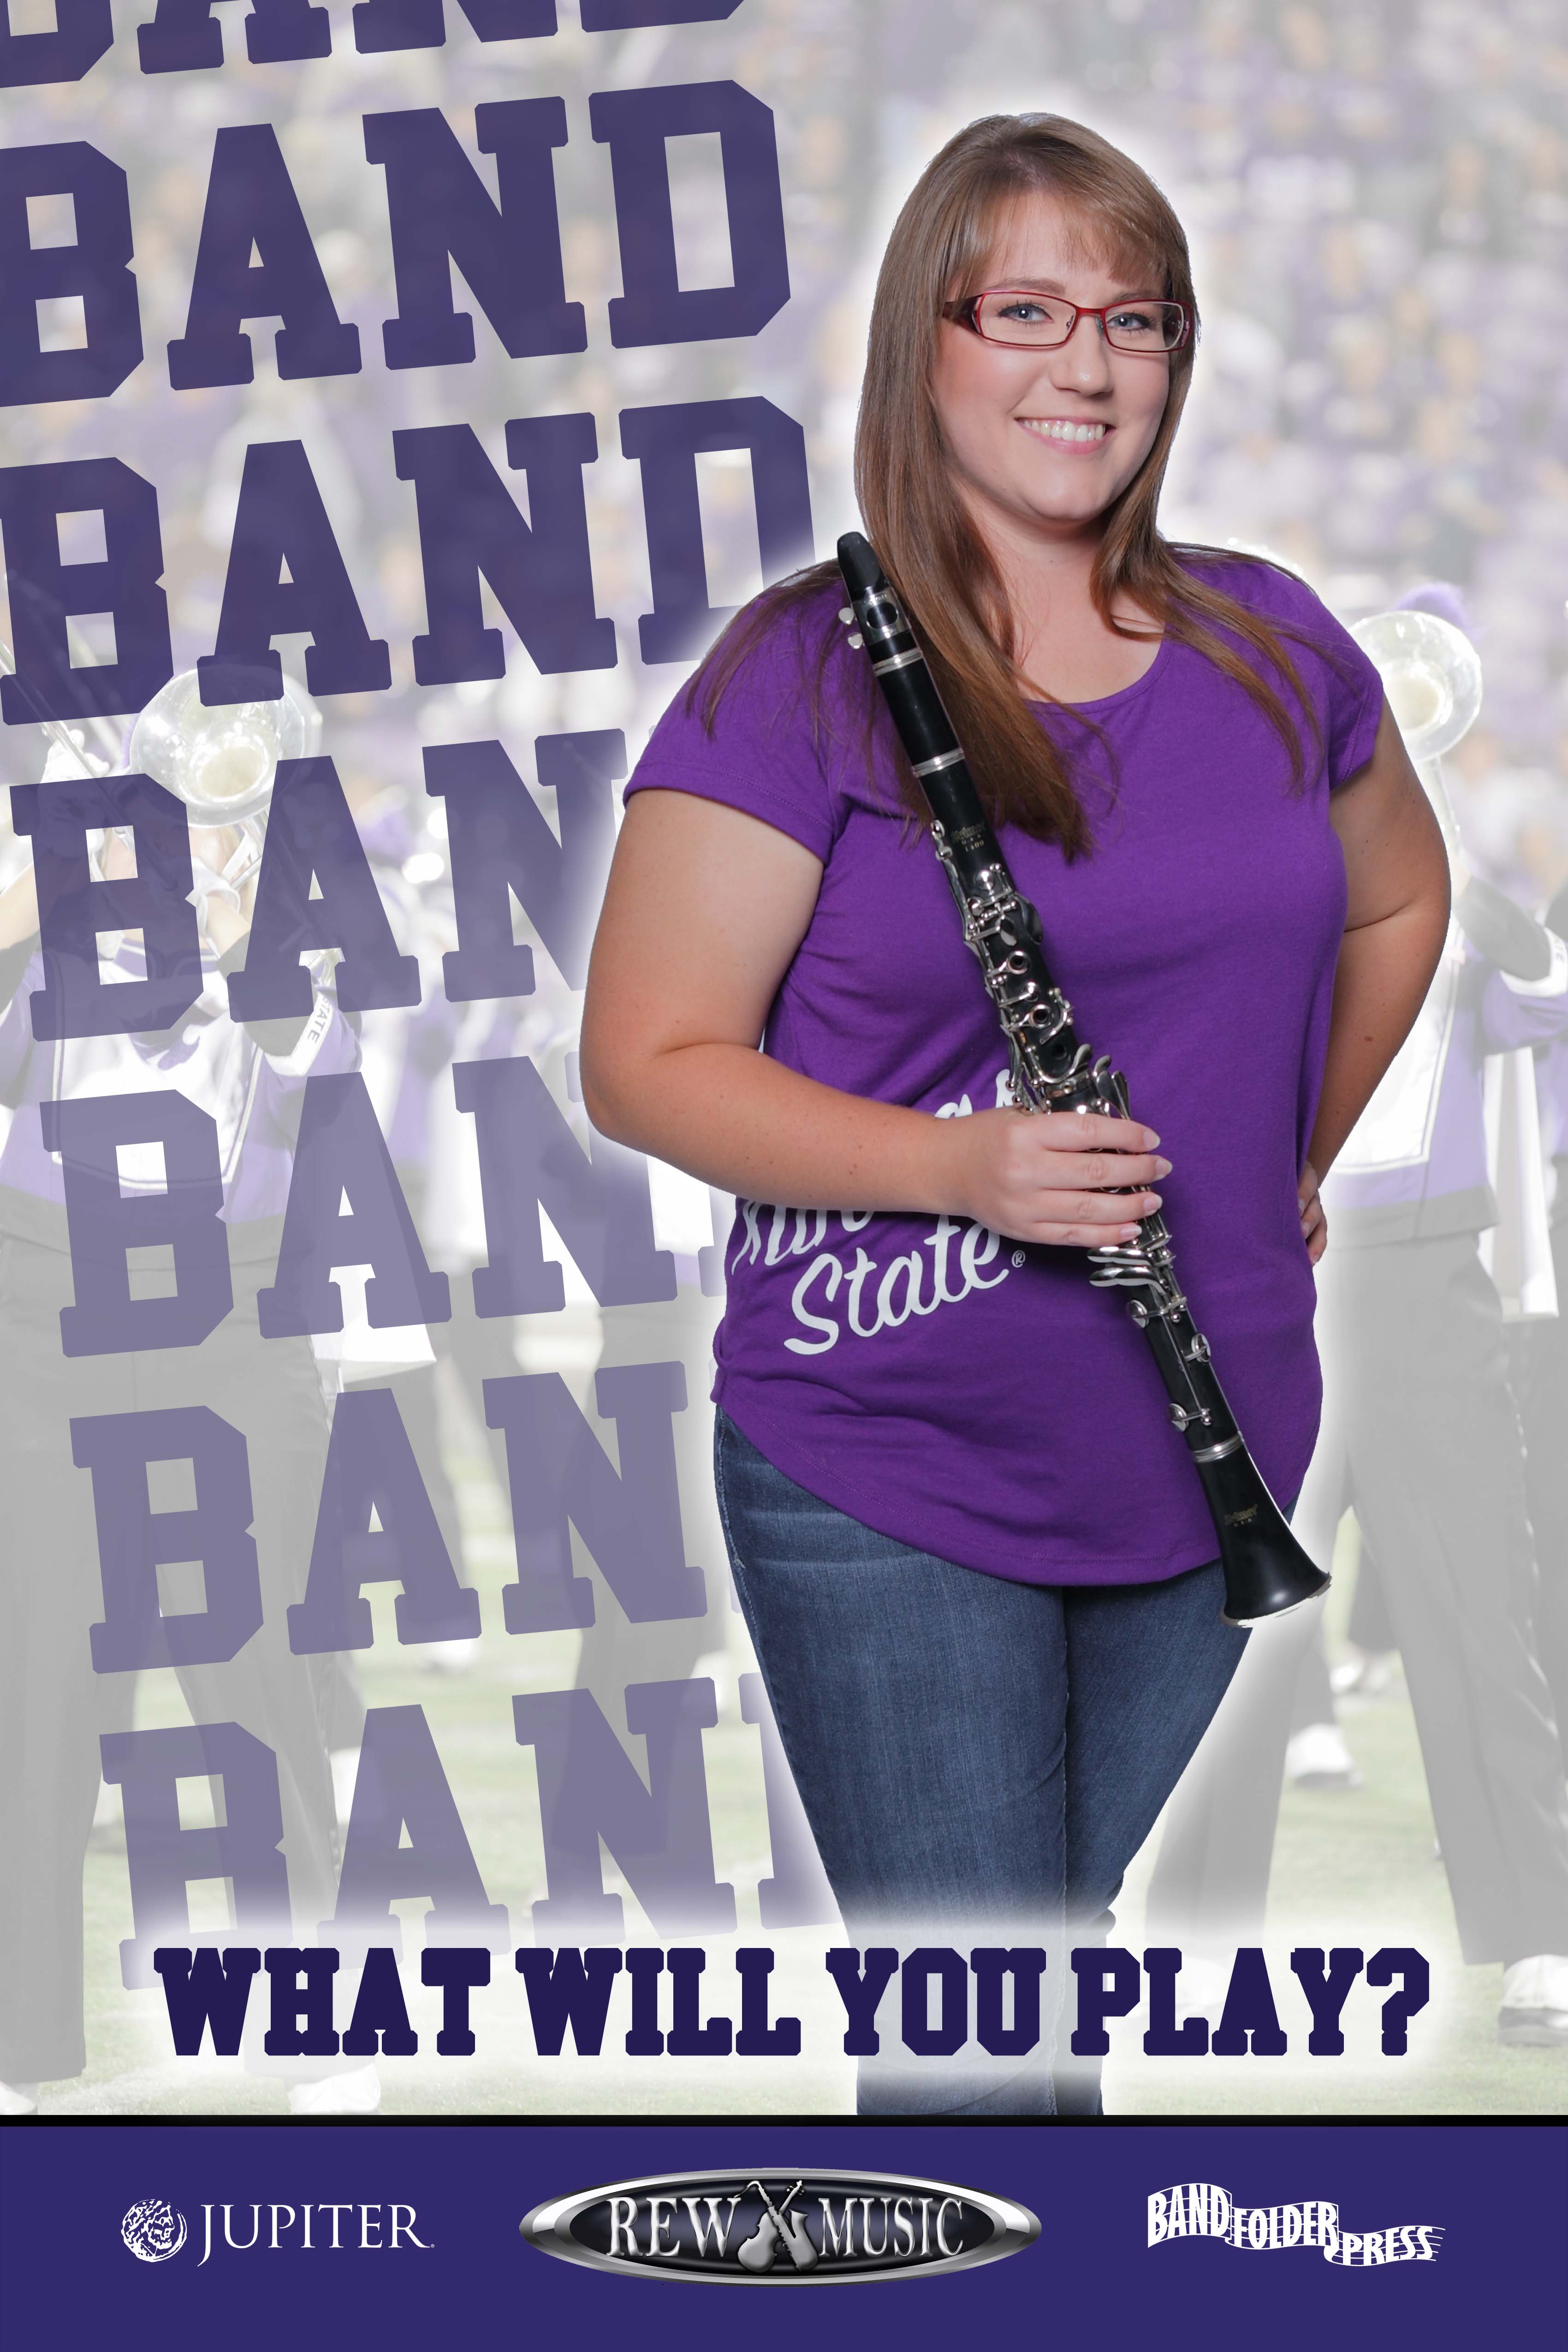 Join the School Band Clarinet player